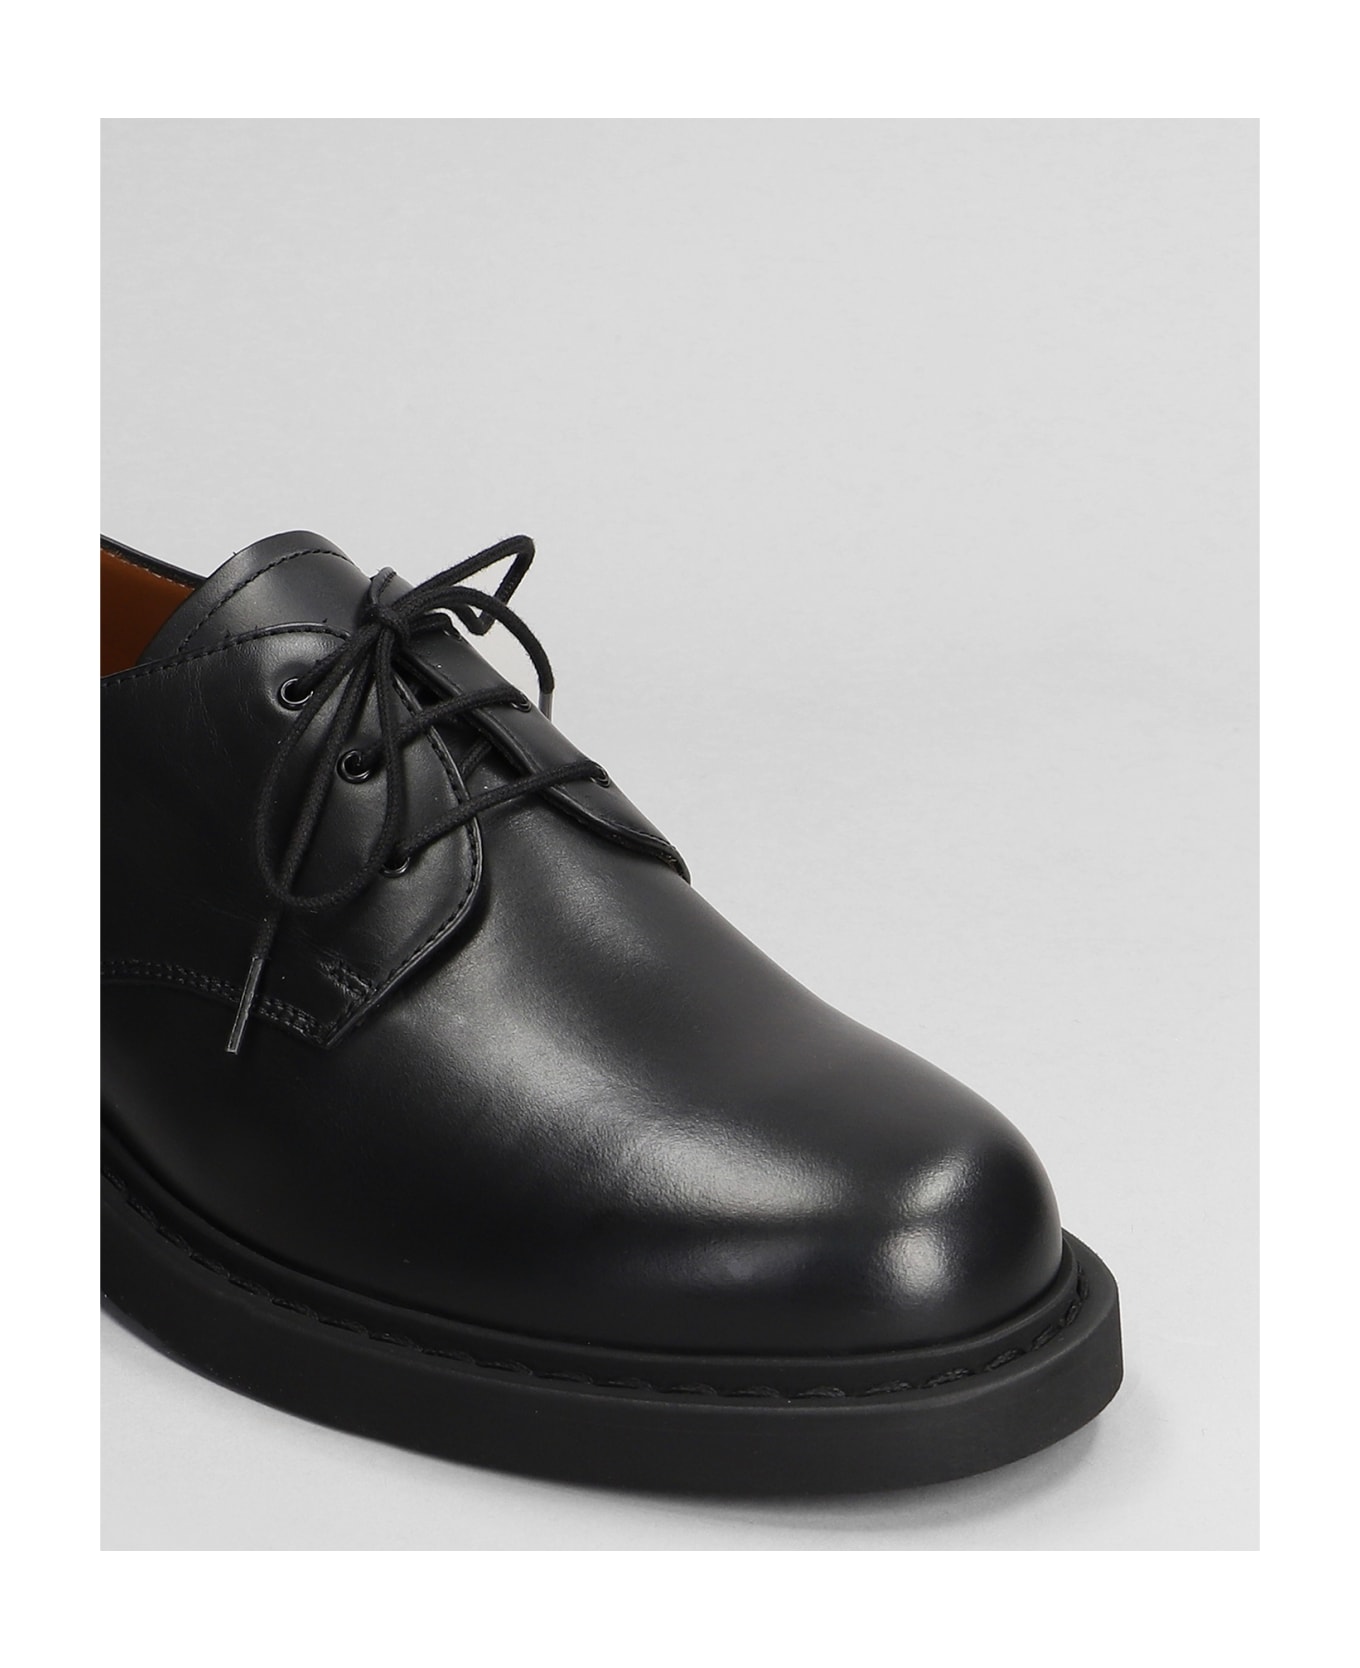 Common Projects Lace Up Shoes - black ローファー＆デッキシューズ